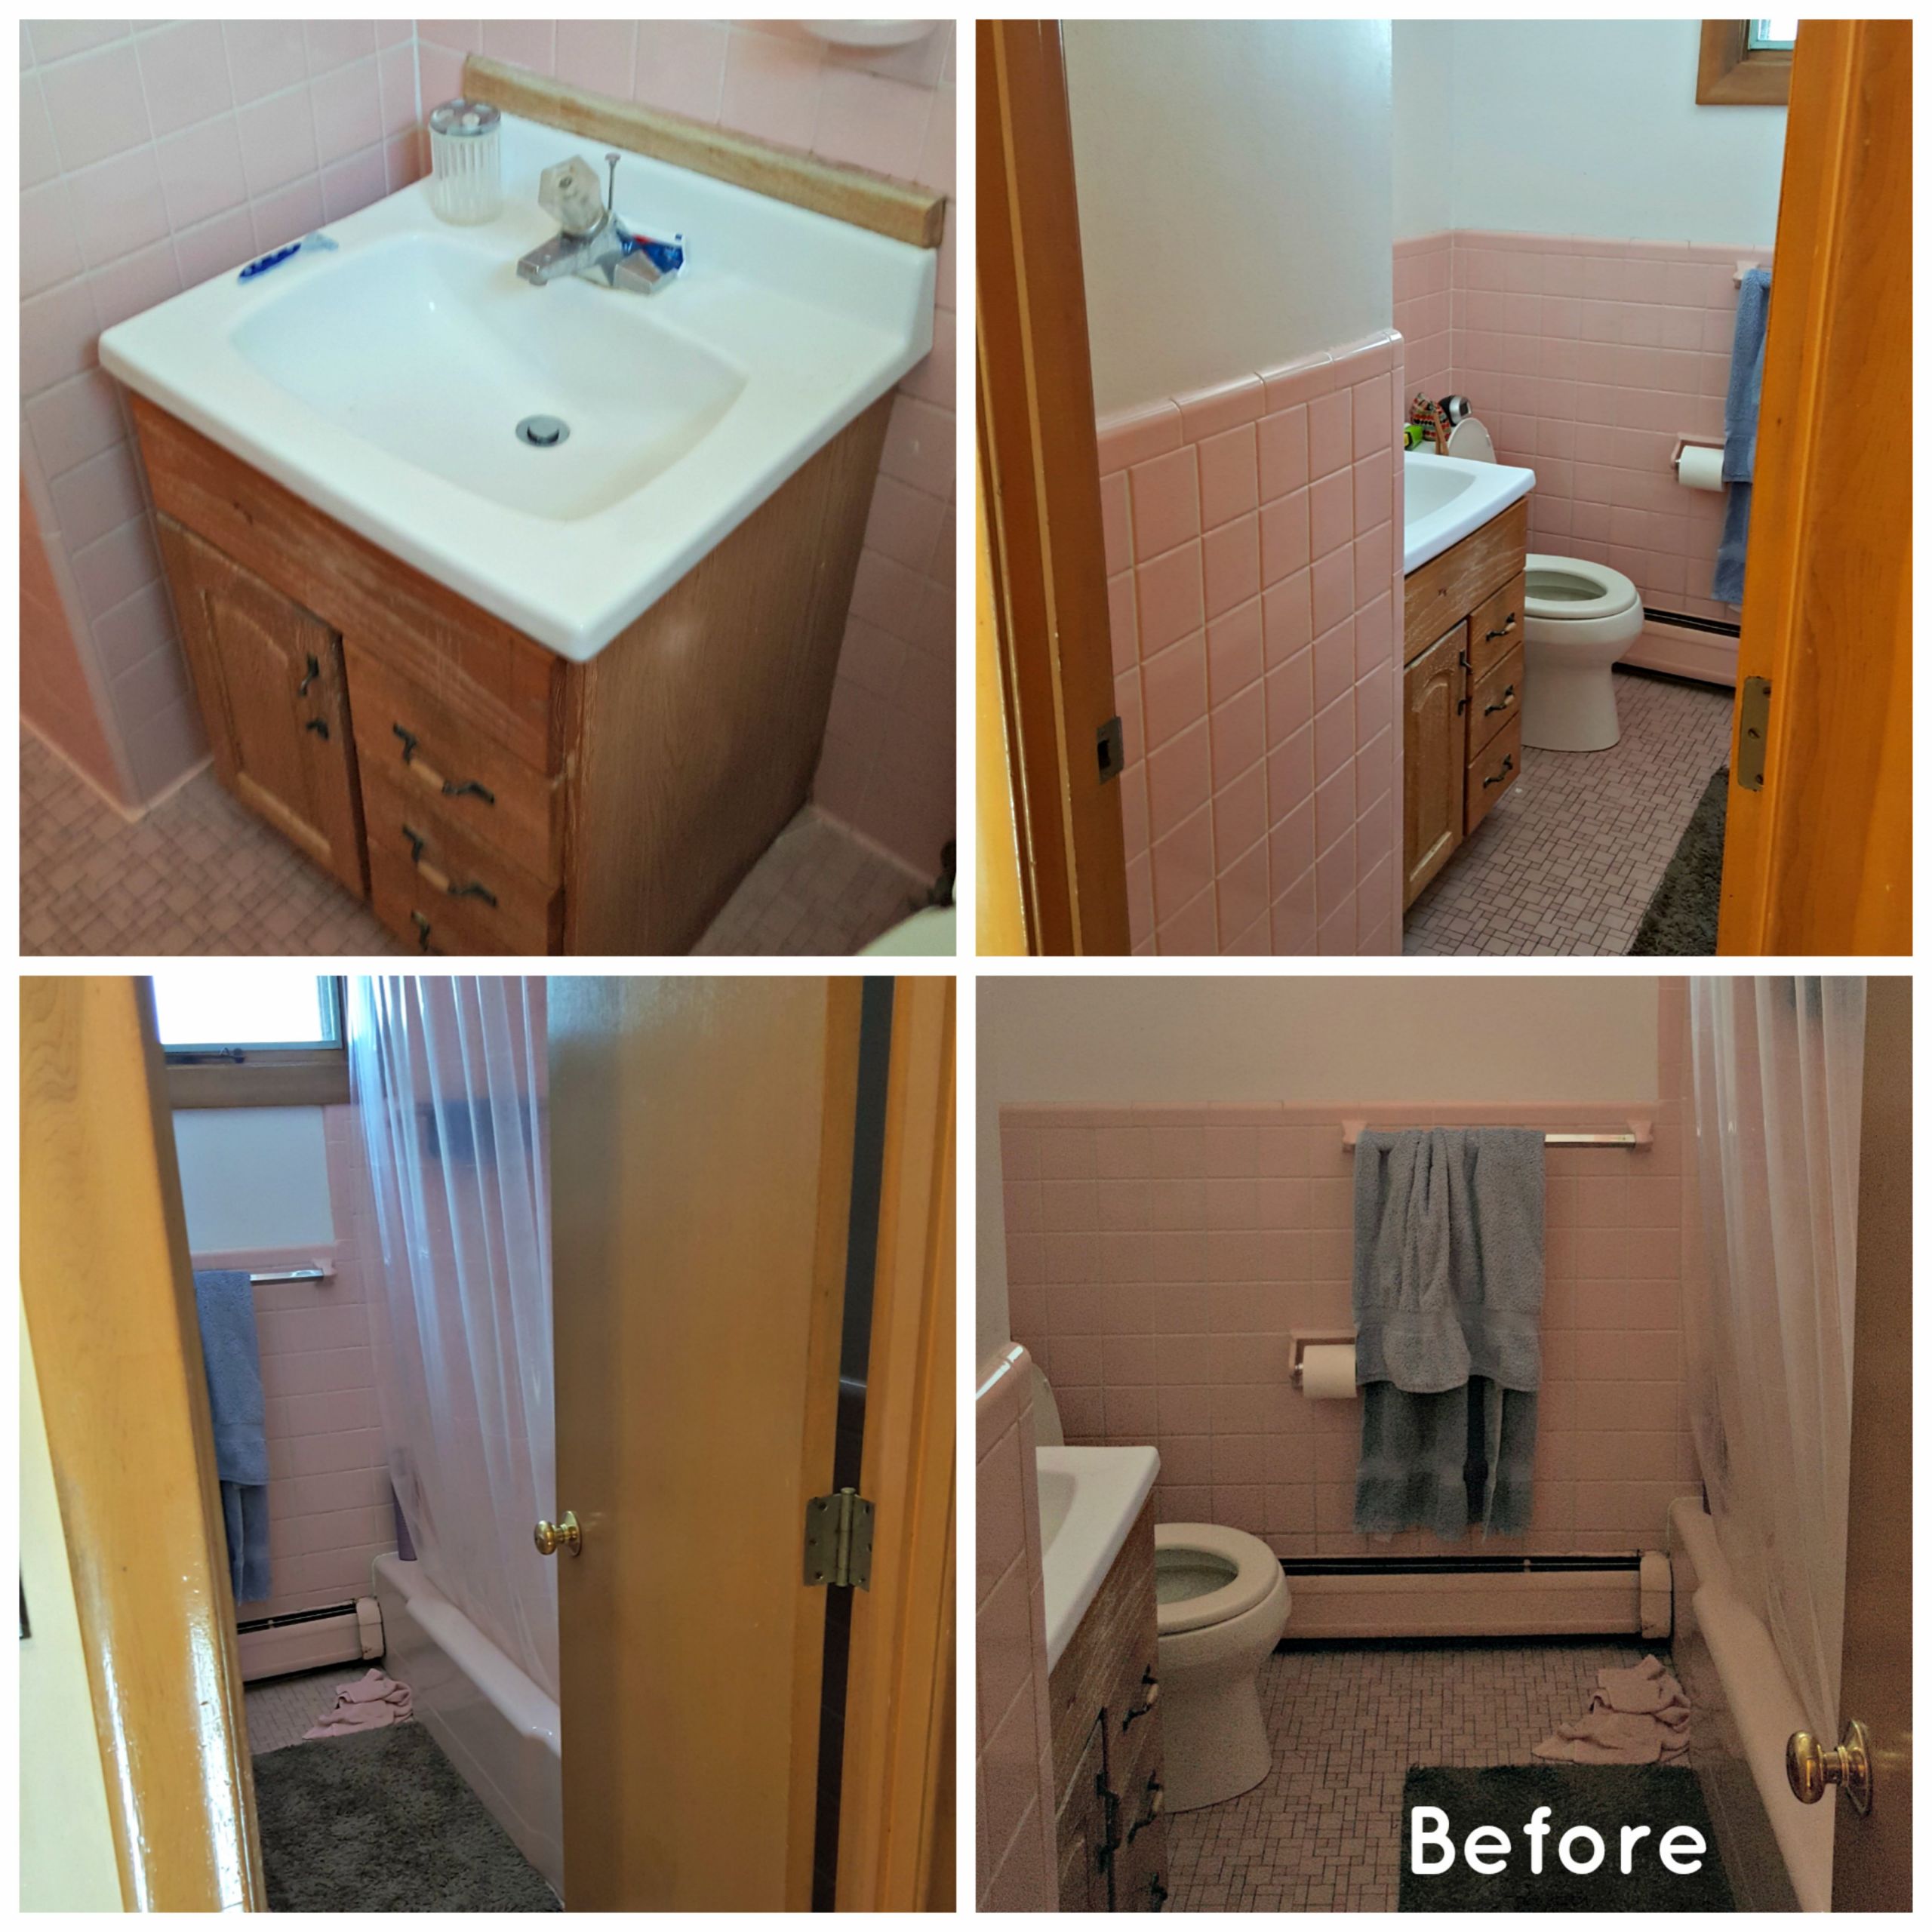 Residential Bathroom Remodeling
 Residential Bathroom Remodeling Project in Belmont MA